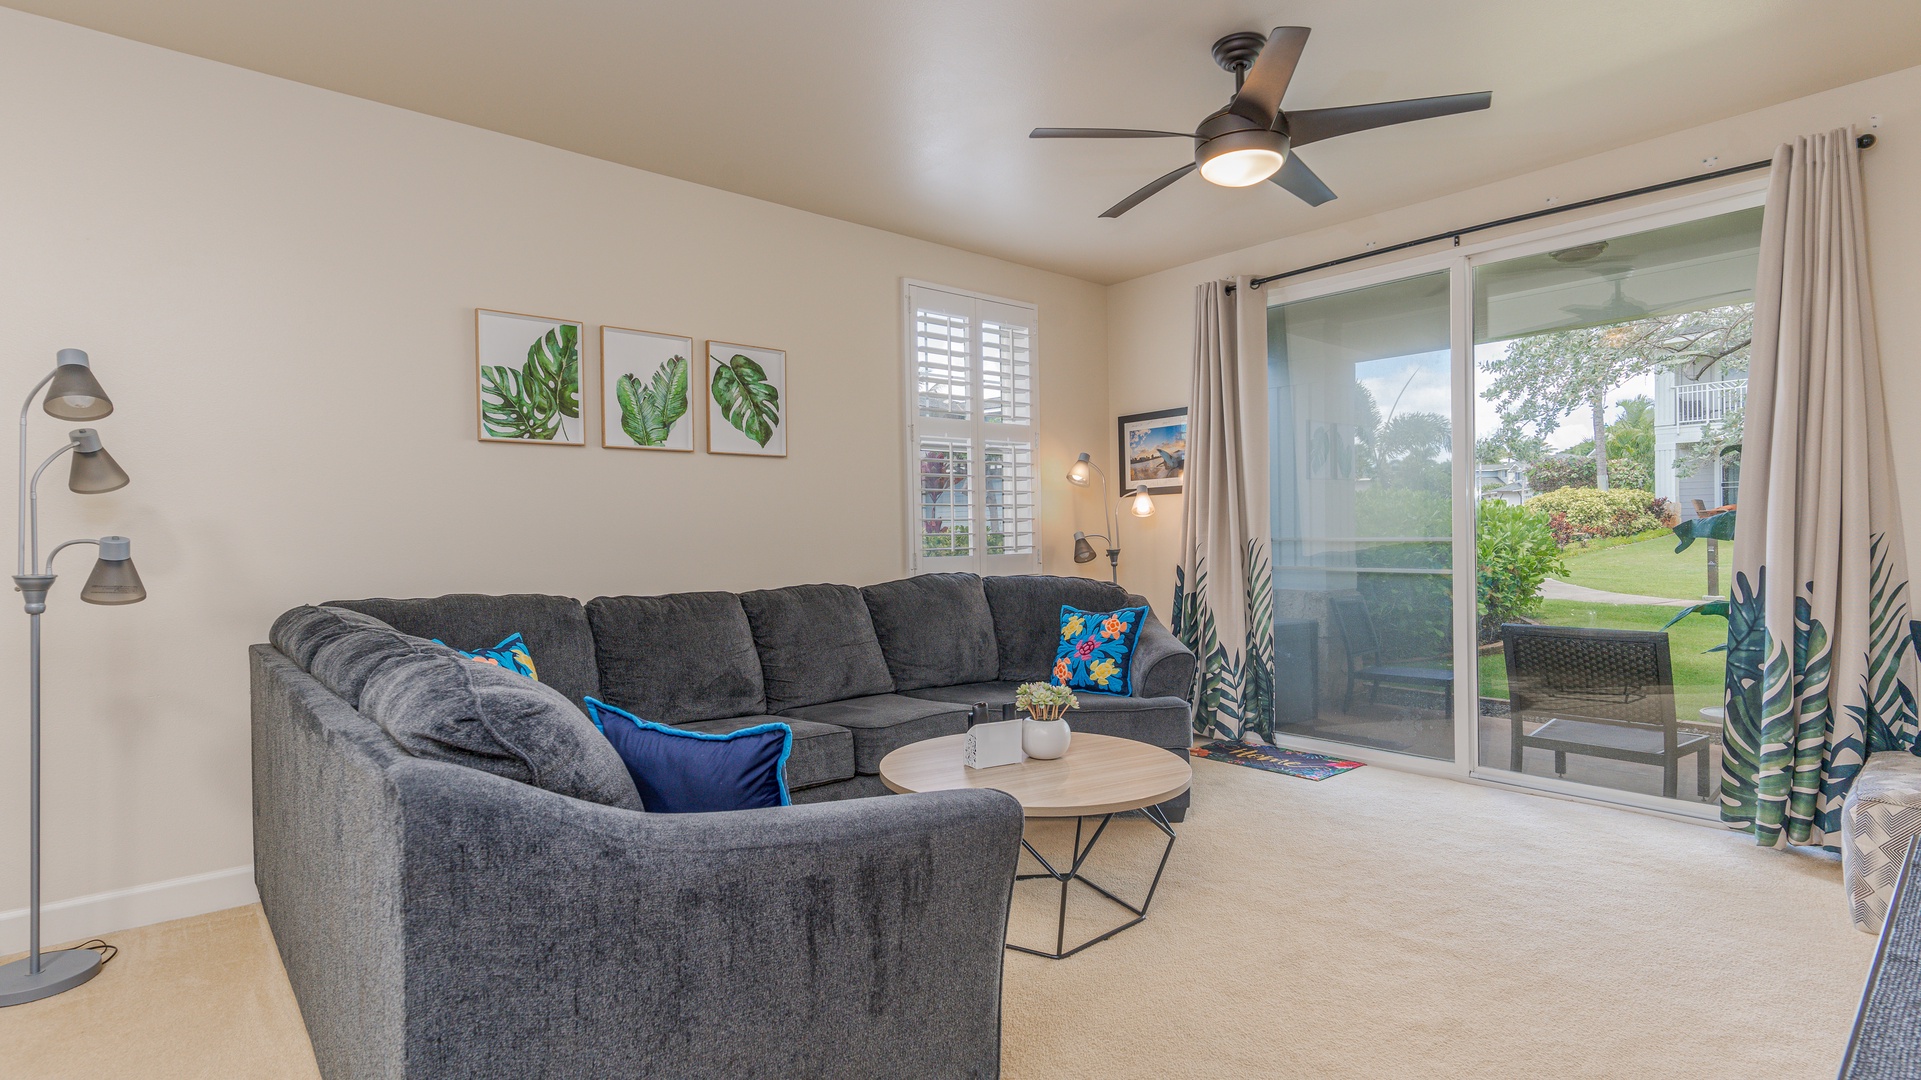 Kapolei Vacation Rentals, Ko Olina Kai 1027A - Sink in to the plush living room furniture and start a game night.